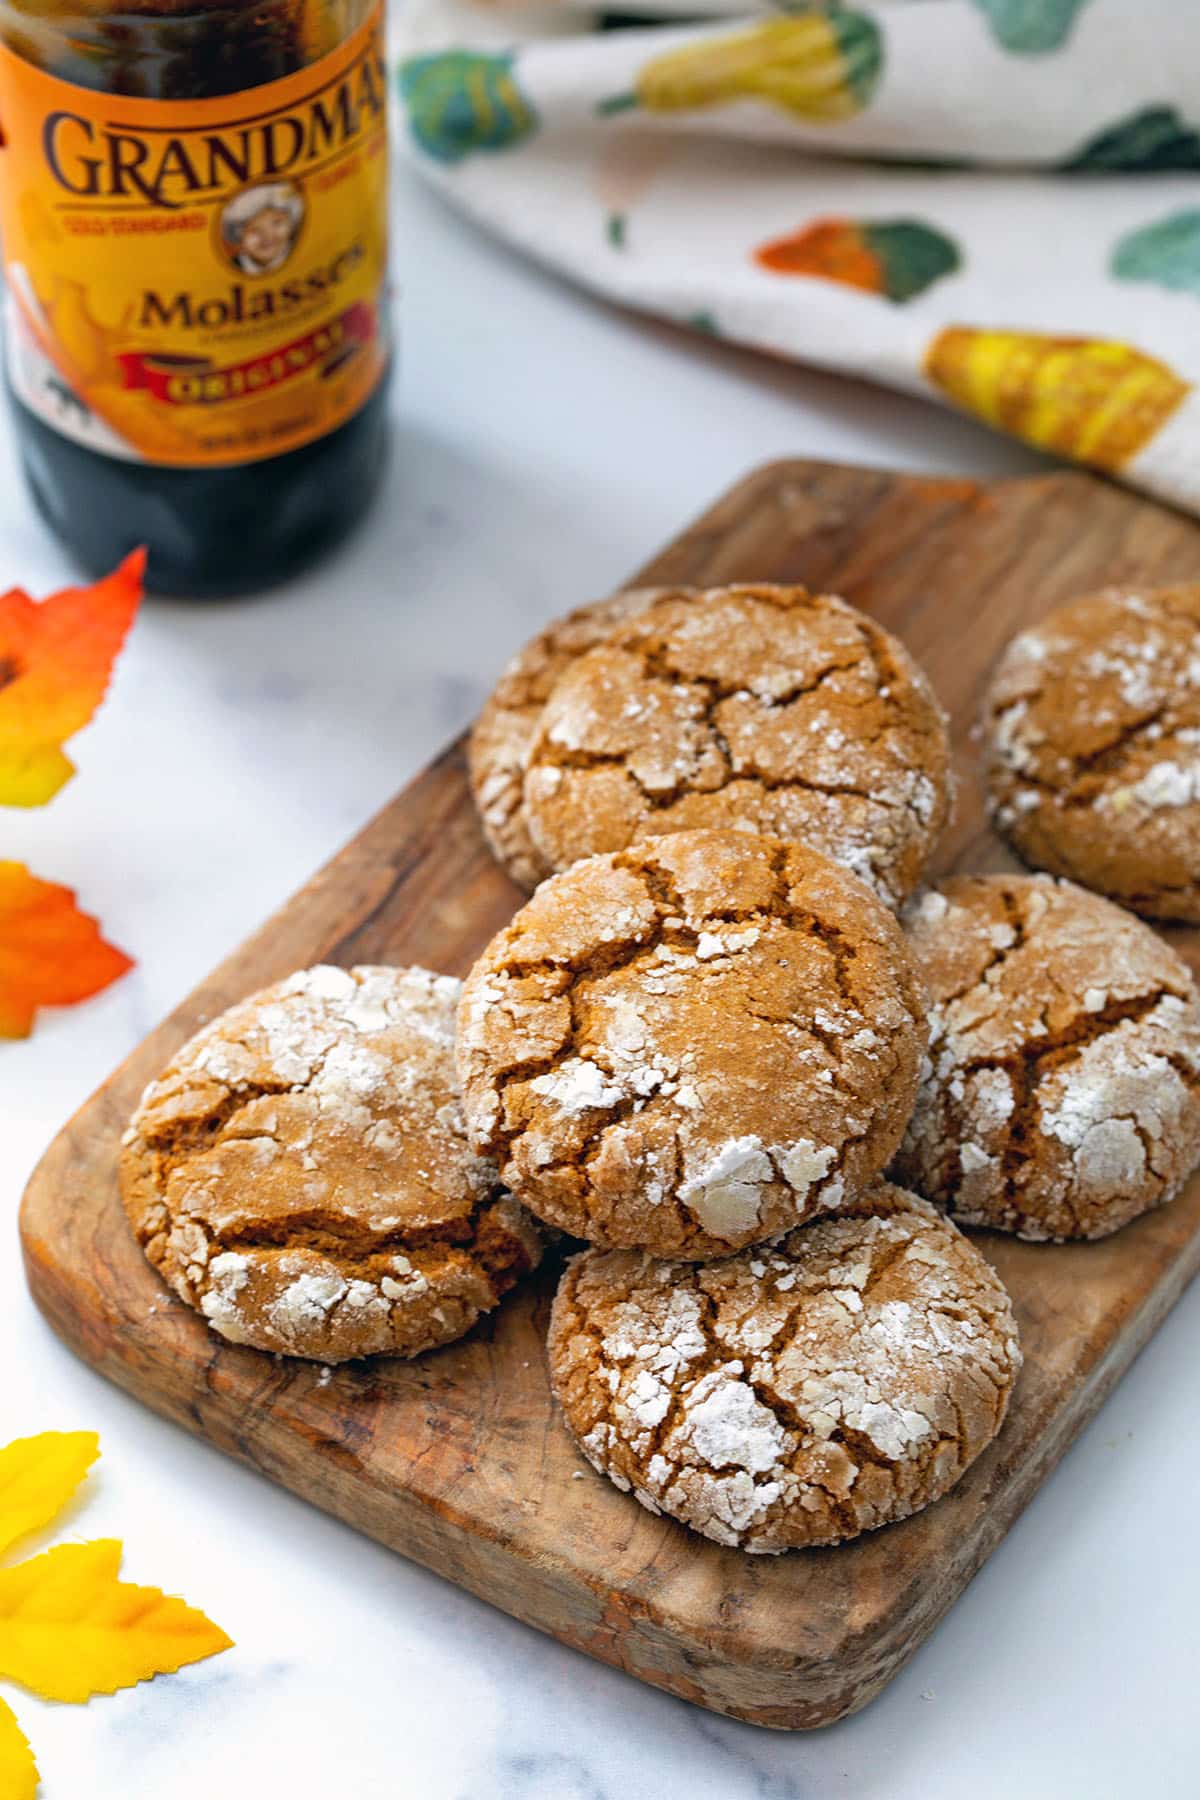 Molasses crinkle cookies on wooden board with container of molasses and fall leaves in background.